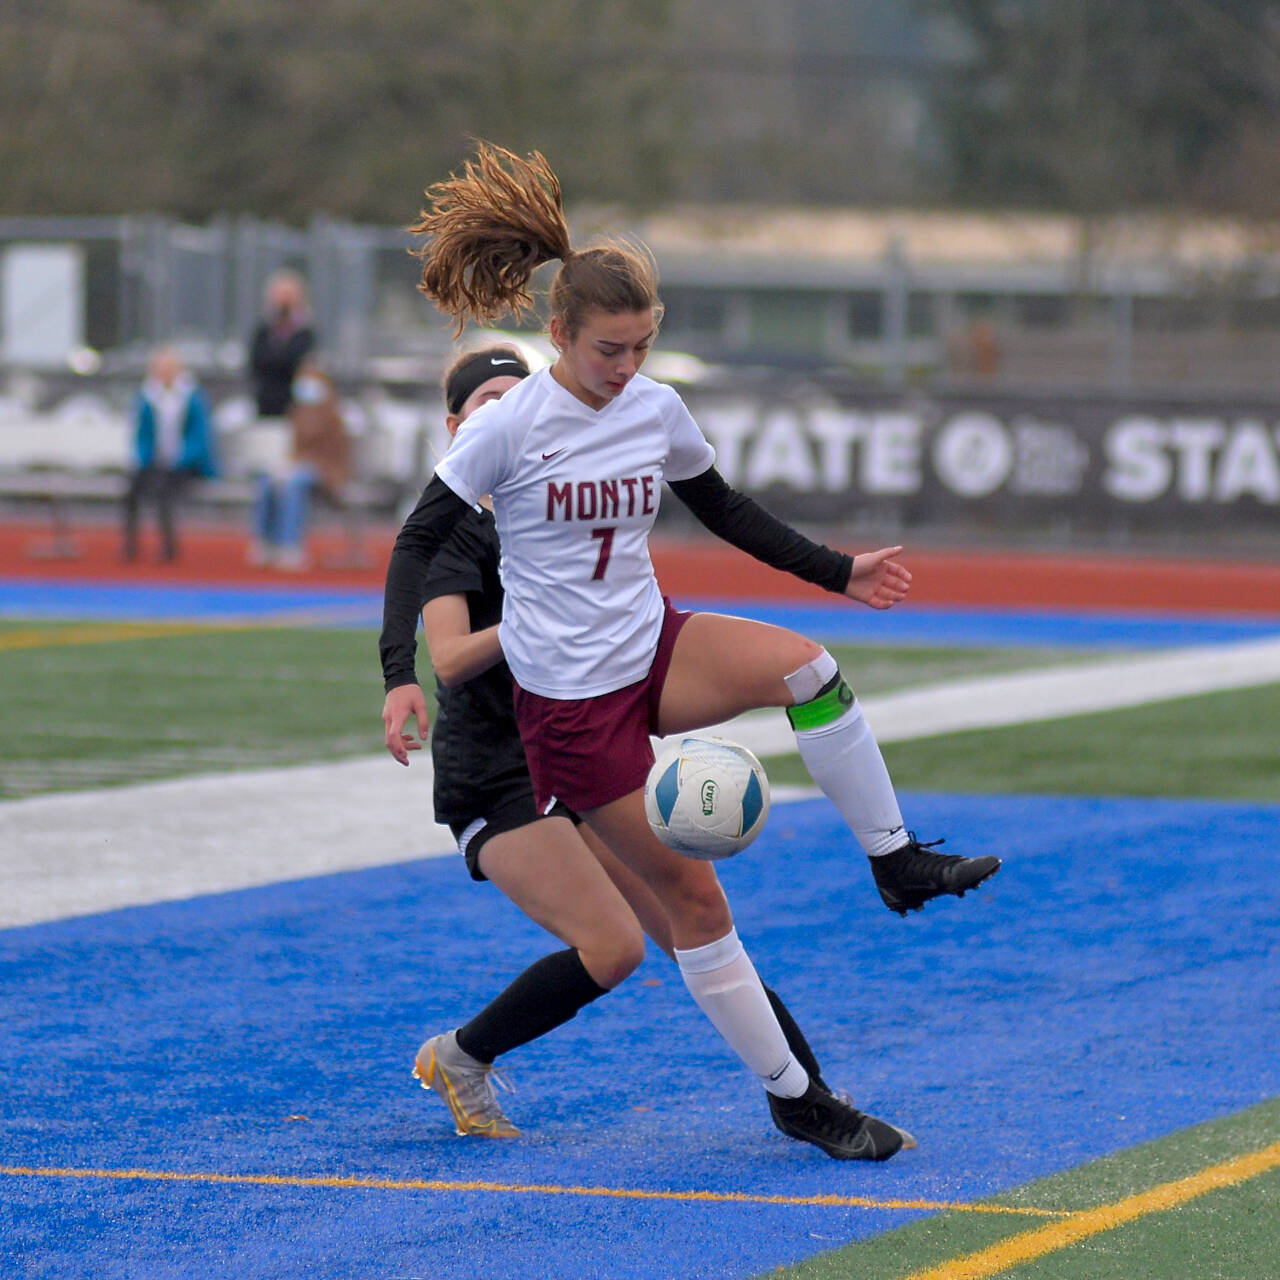 RYAN SPARKS | THE DAILY WORLD Montesano’s Jaiden Morrison gets a foot on the ball during the Bulldogs 5-0 loss to Klahowya in the 1A State Tournament’s third/fourth-place game on Saturday at Shoreline Stadium in Shoreline.